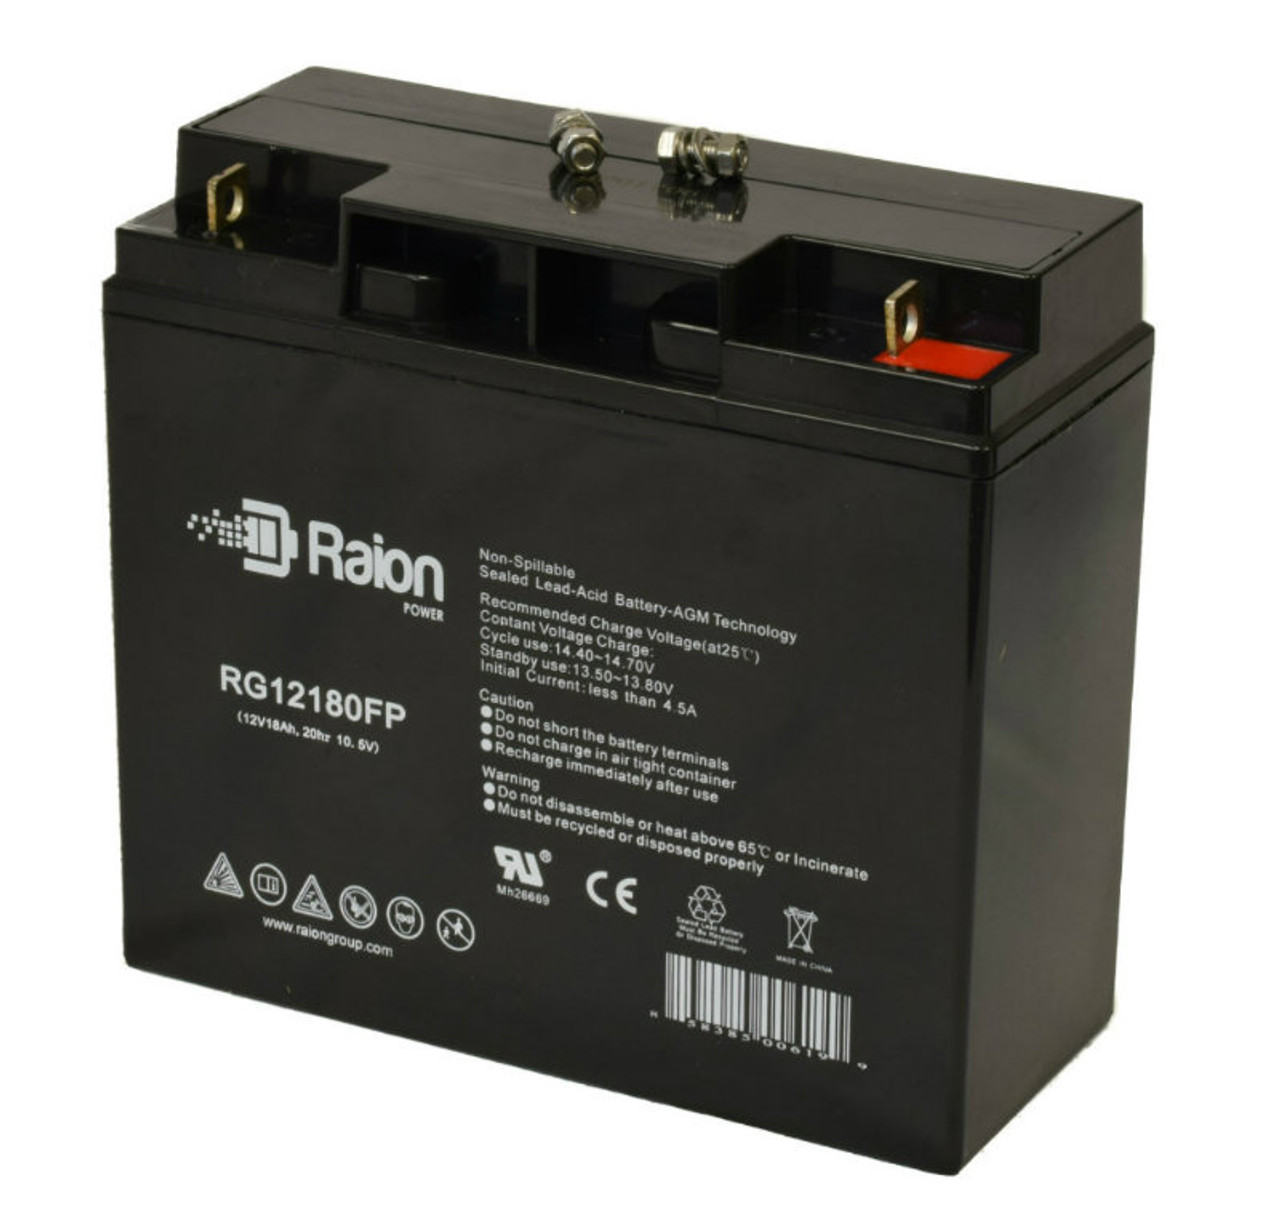 Raion Power Replacement 12V 18Ah Emergency Light Battery for Power Cell PC12180 - 1 Pack